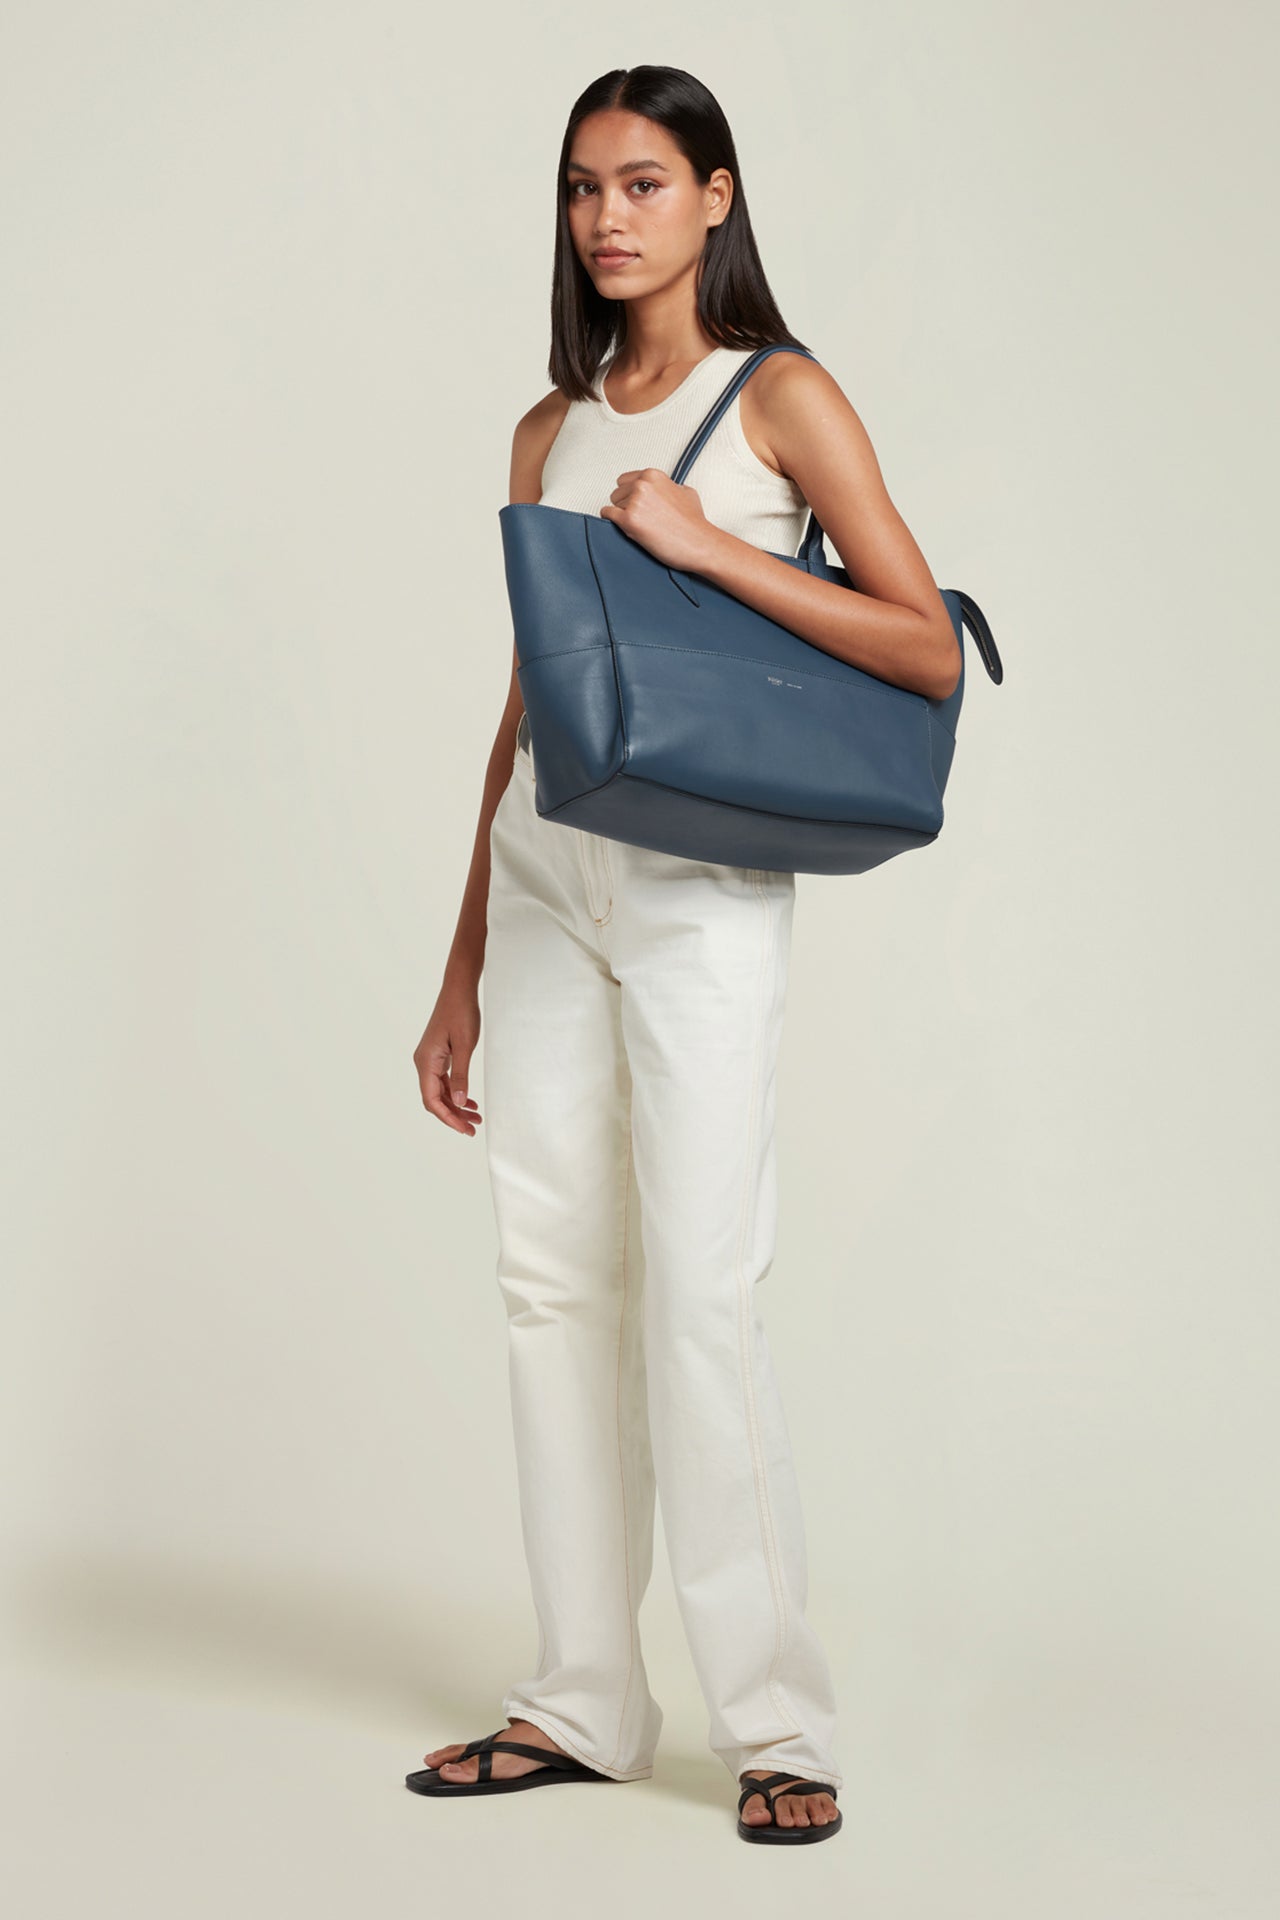 Storm Small Incognito Tote in Smooth Calfskin